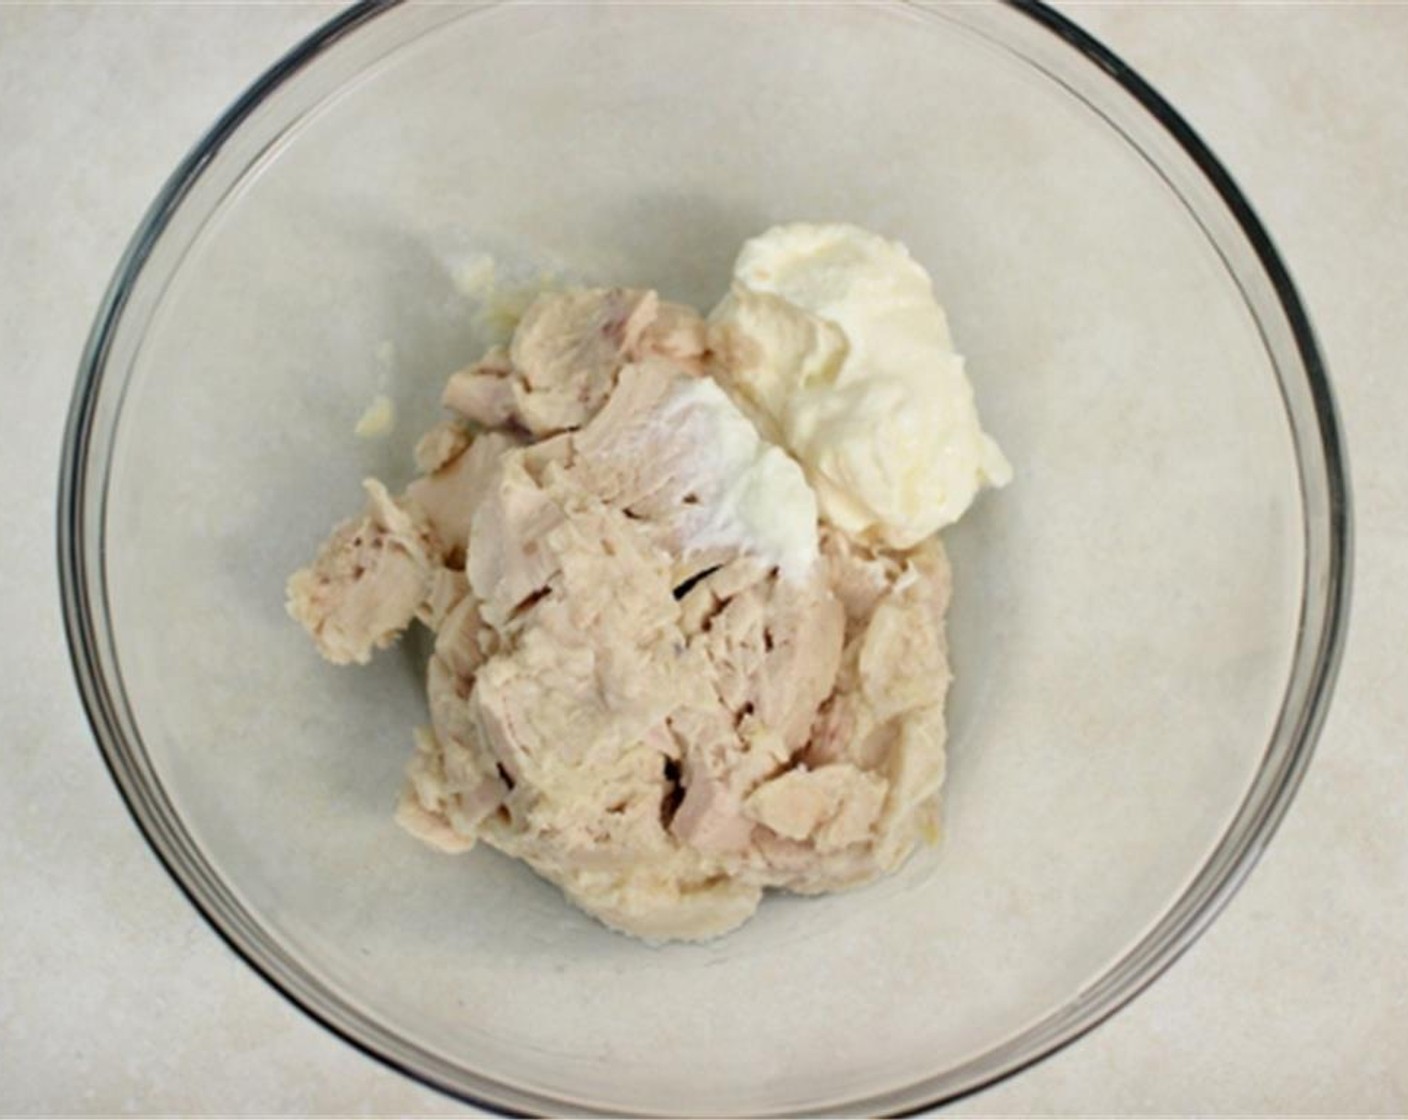 step 6 Drain the Canned Tuna (1 cup) and mash it with a fork. Mix the tuna with Mayonnaise (1/4 cup).